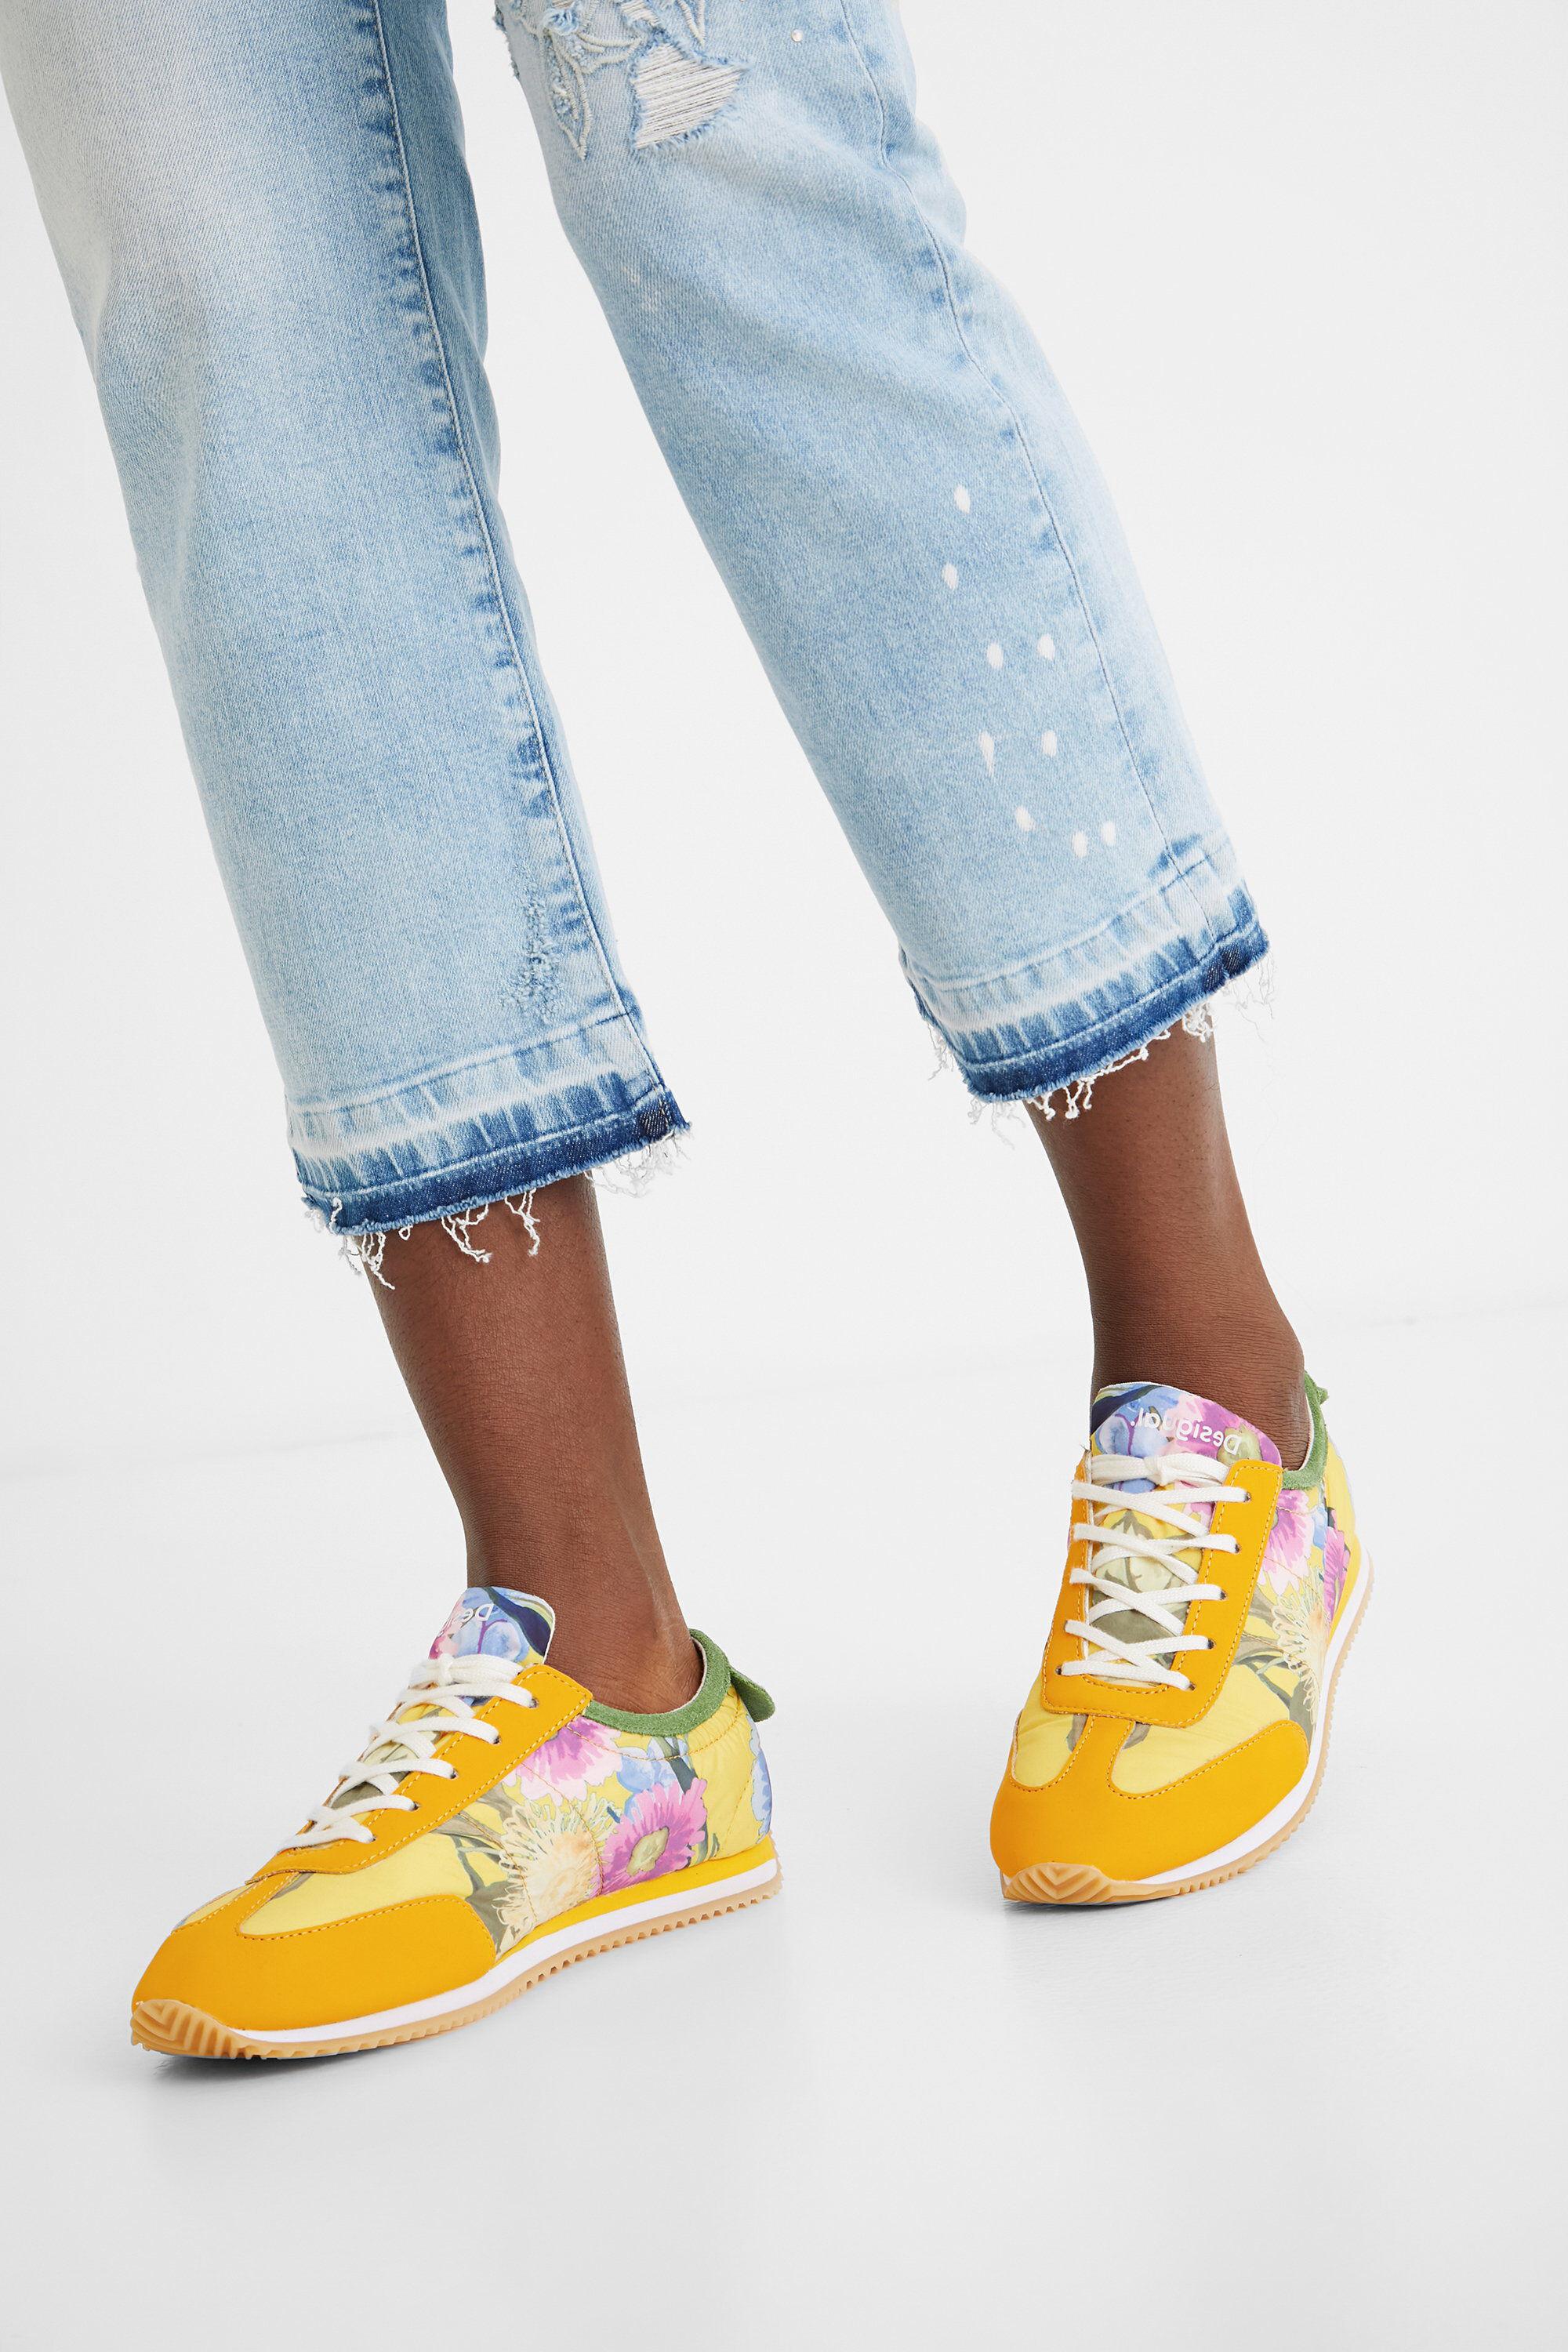 Desigual Floral Print Sneakers in Yellow | Lyst